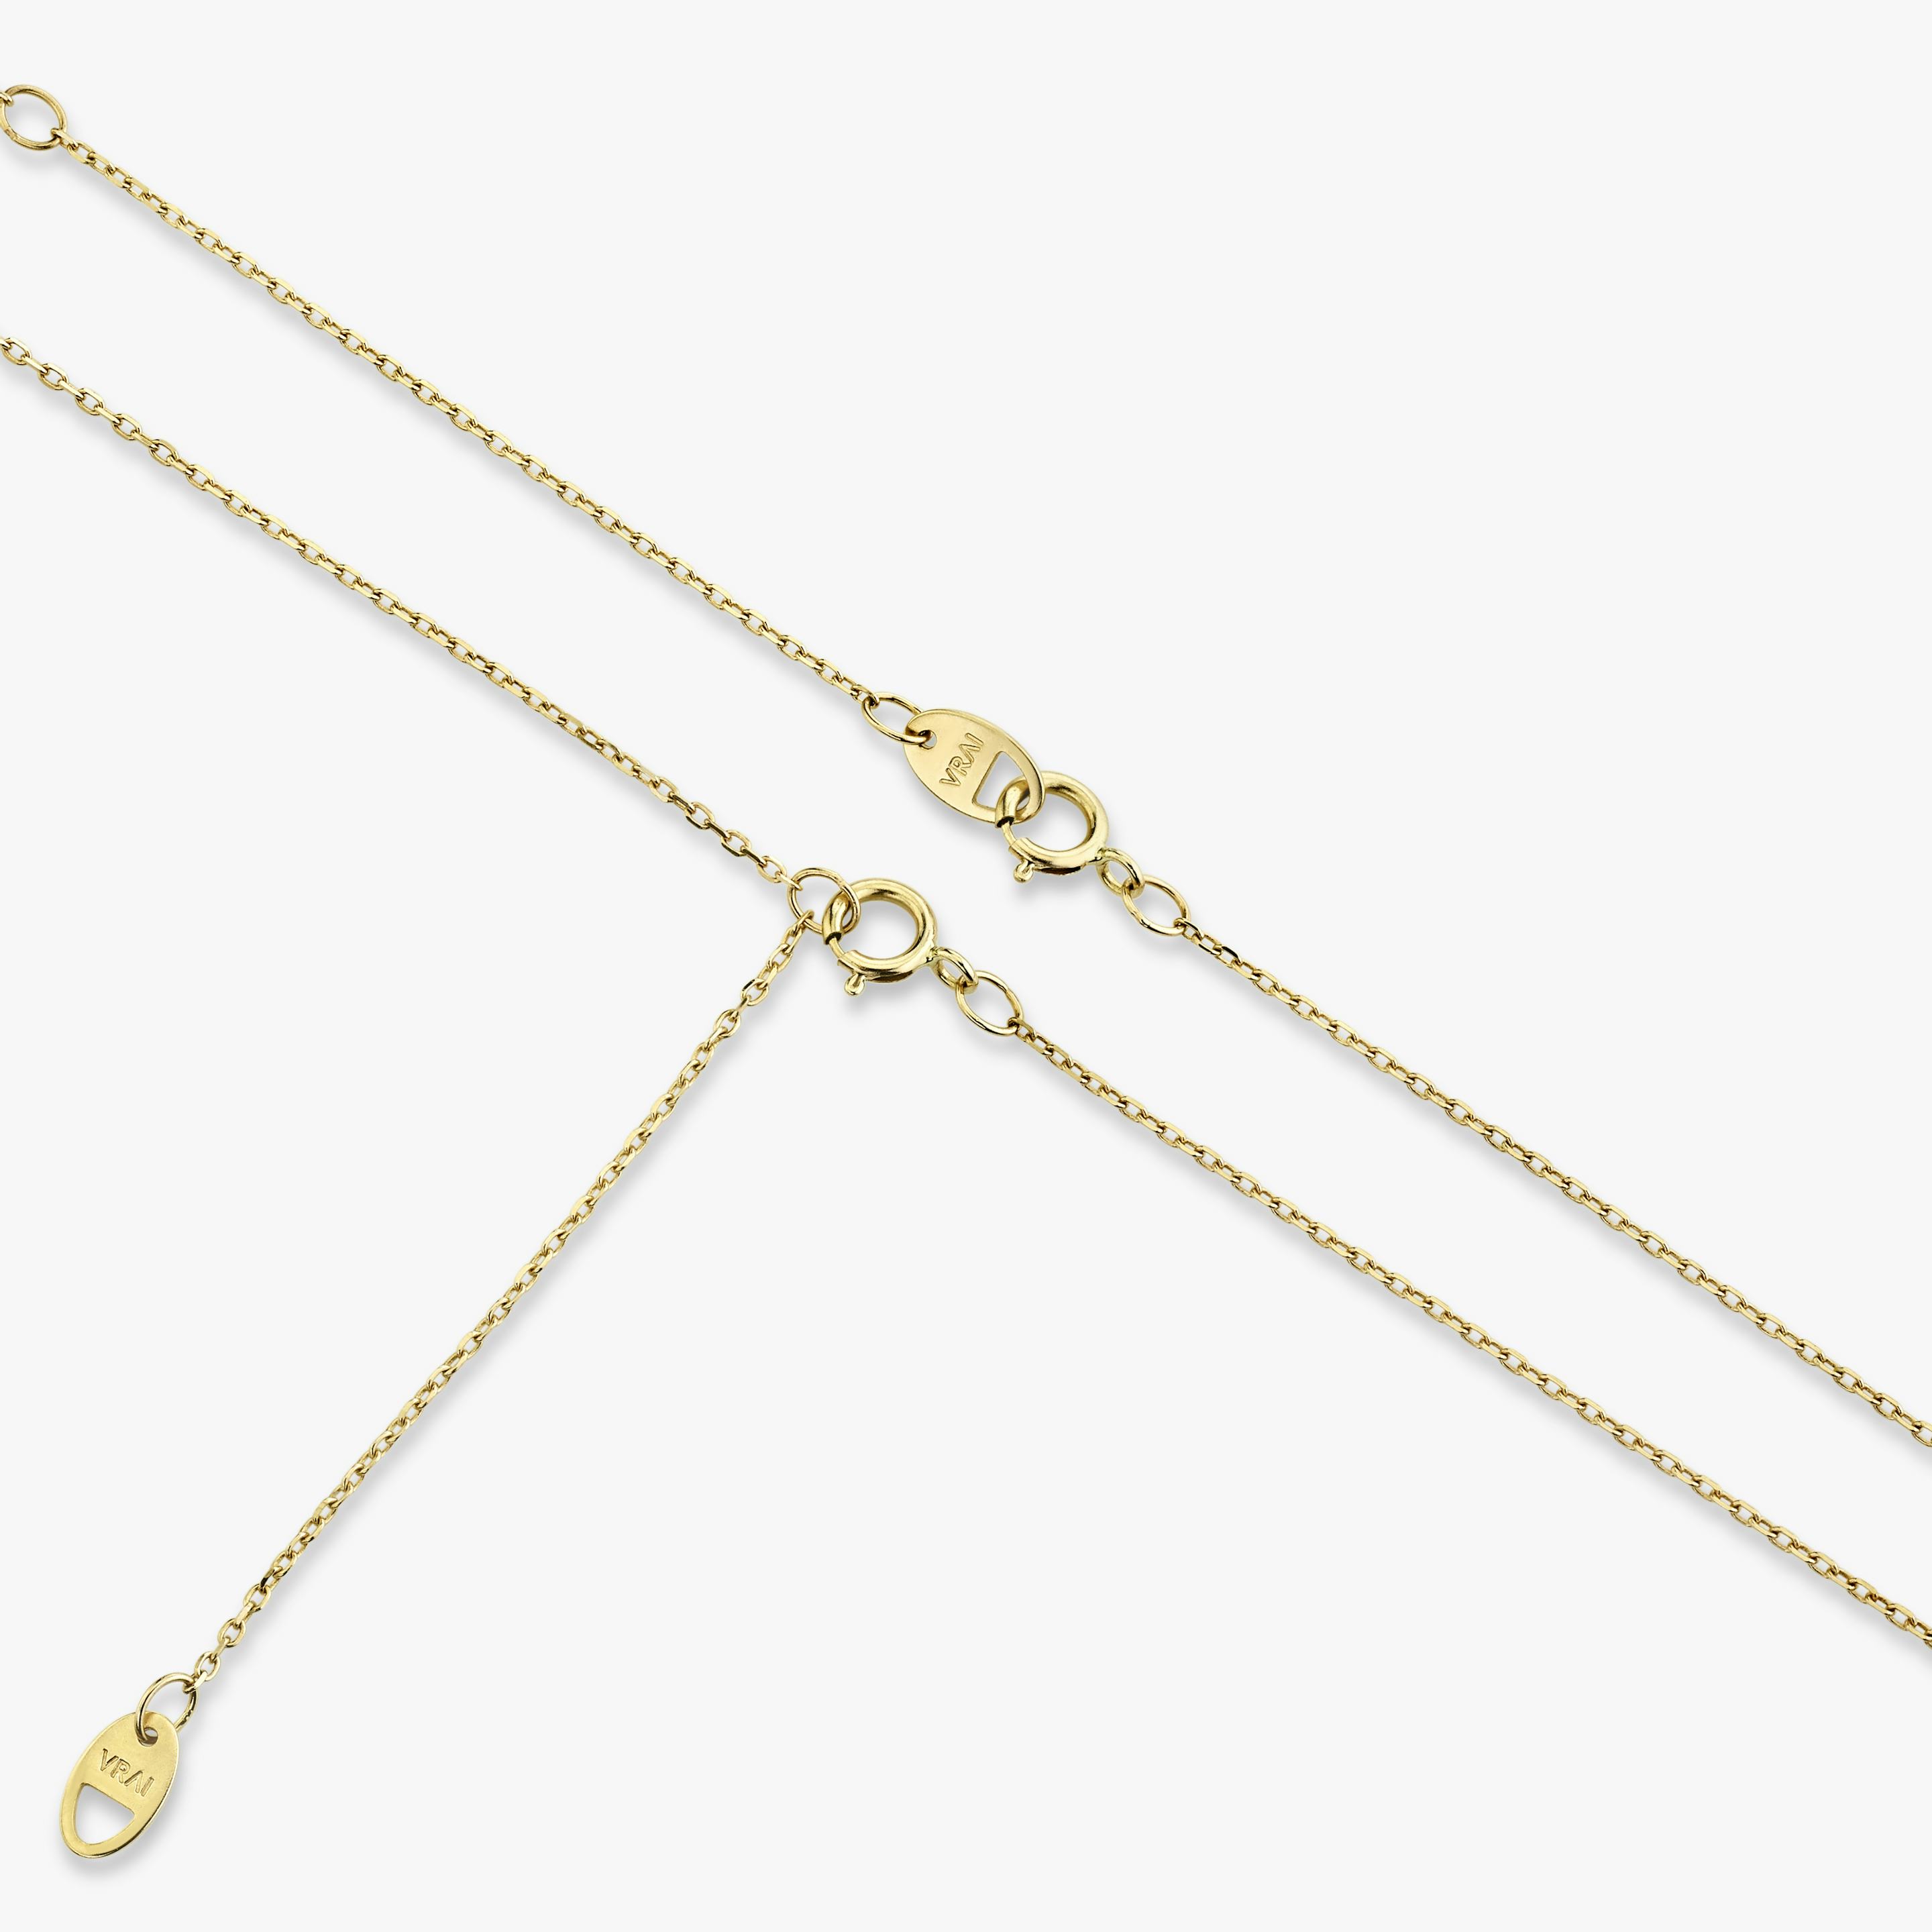 Petite V Necklace | Round Brilliant | 14k | 18k Yellow Gold | Chain length: 16-18